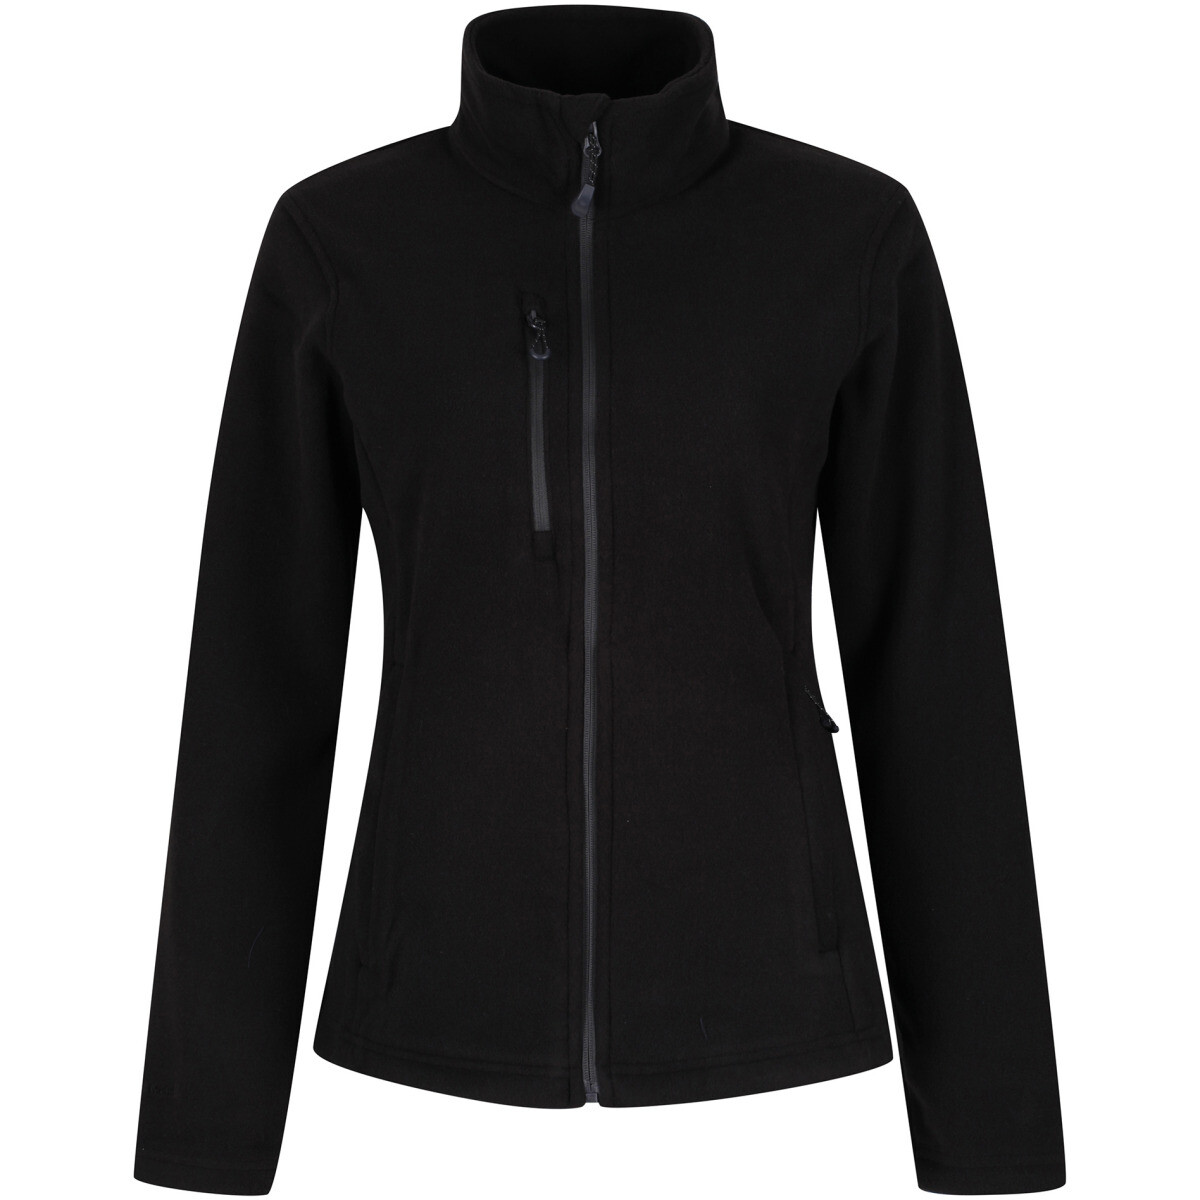 Regatta TRF628 Ladies Honestly Made Recycled Fleece Jacket from Lawson HIS